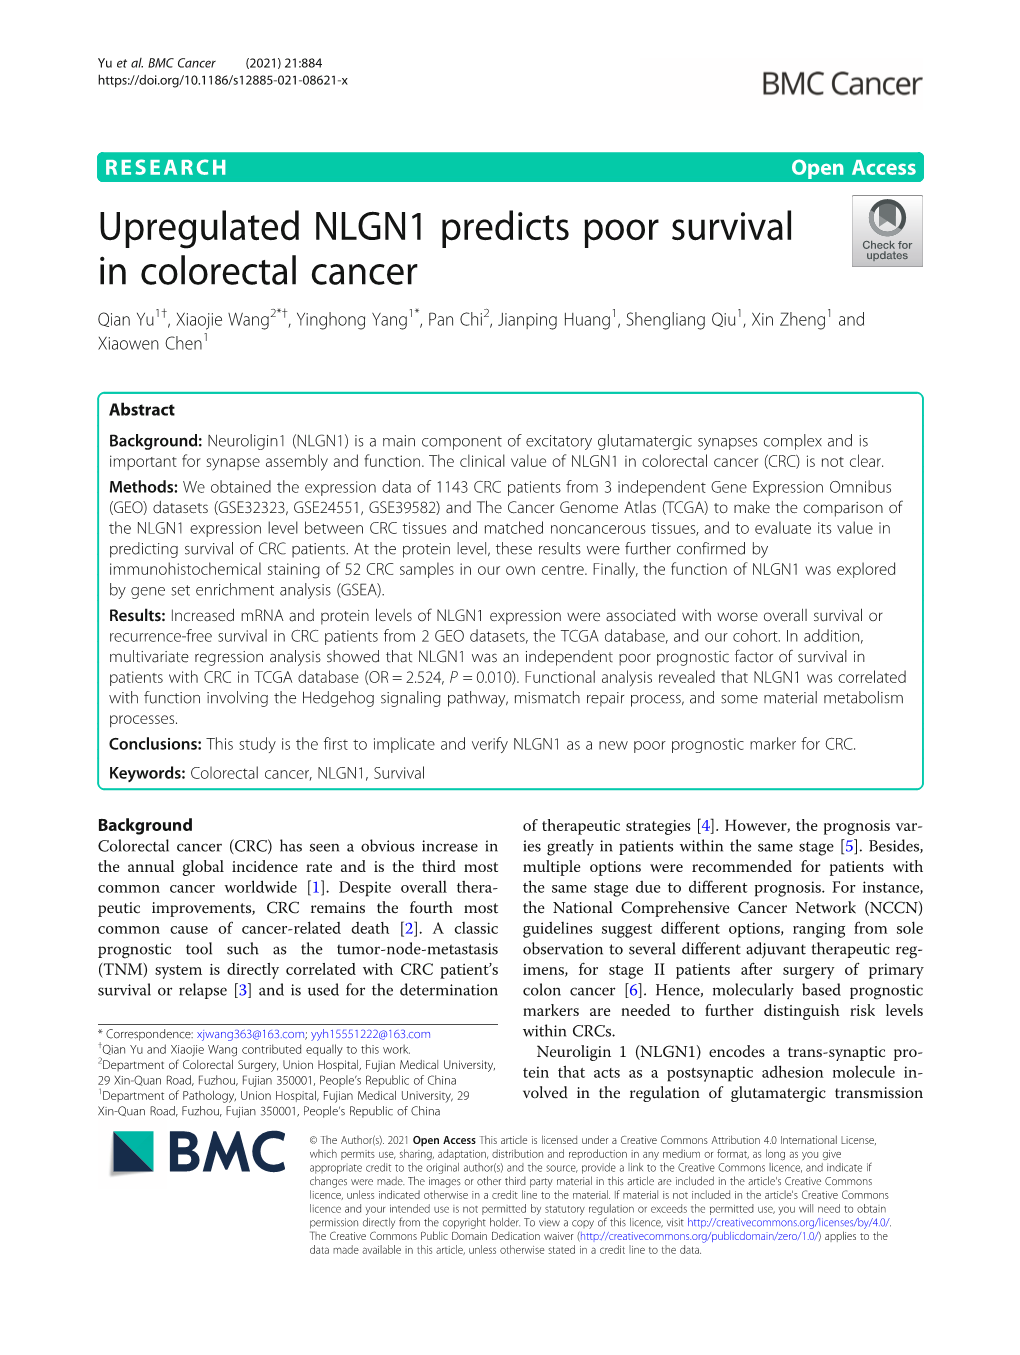 Upregulated NLGN1 Predicts Poor Survival in Colorectal Cancer